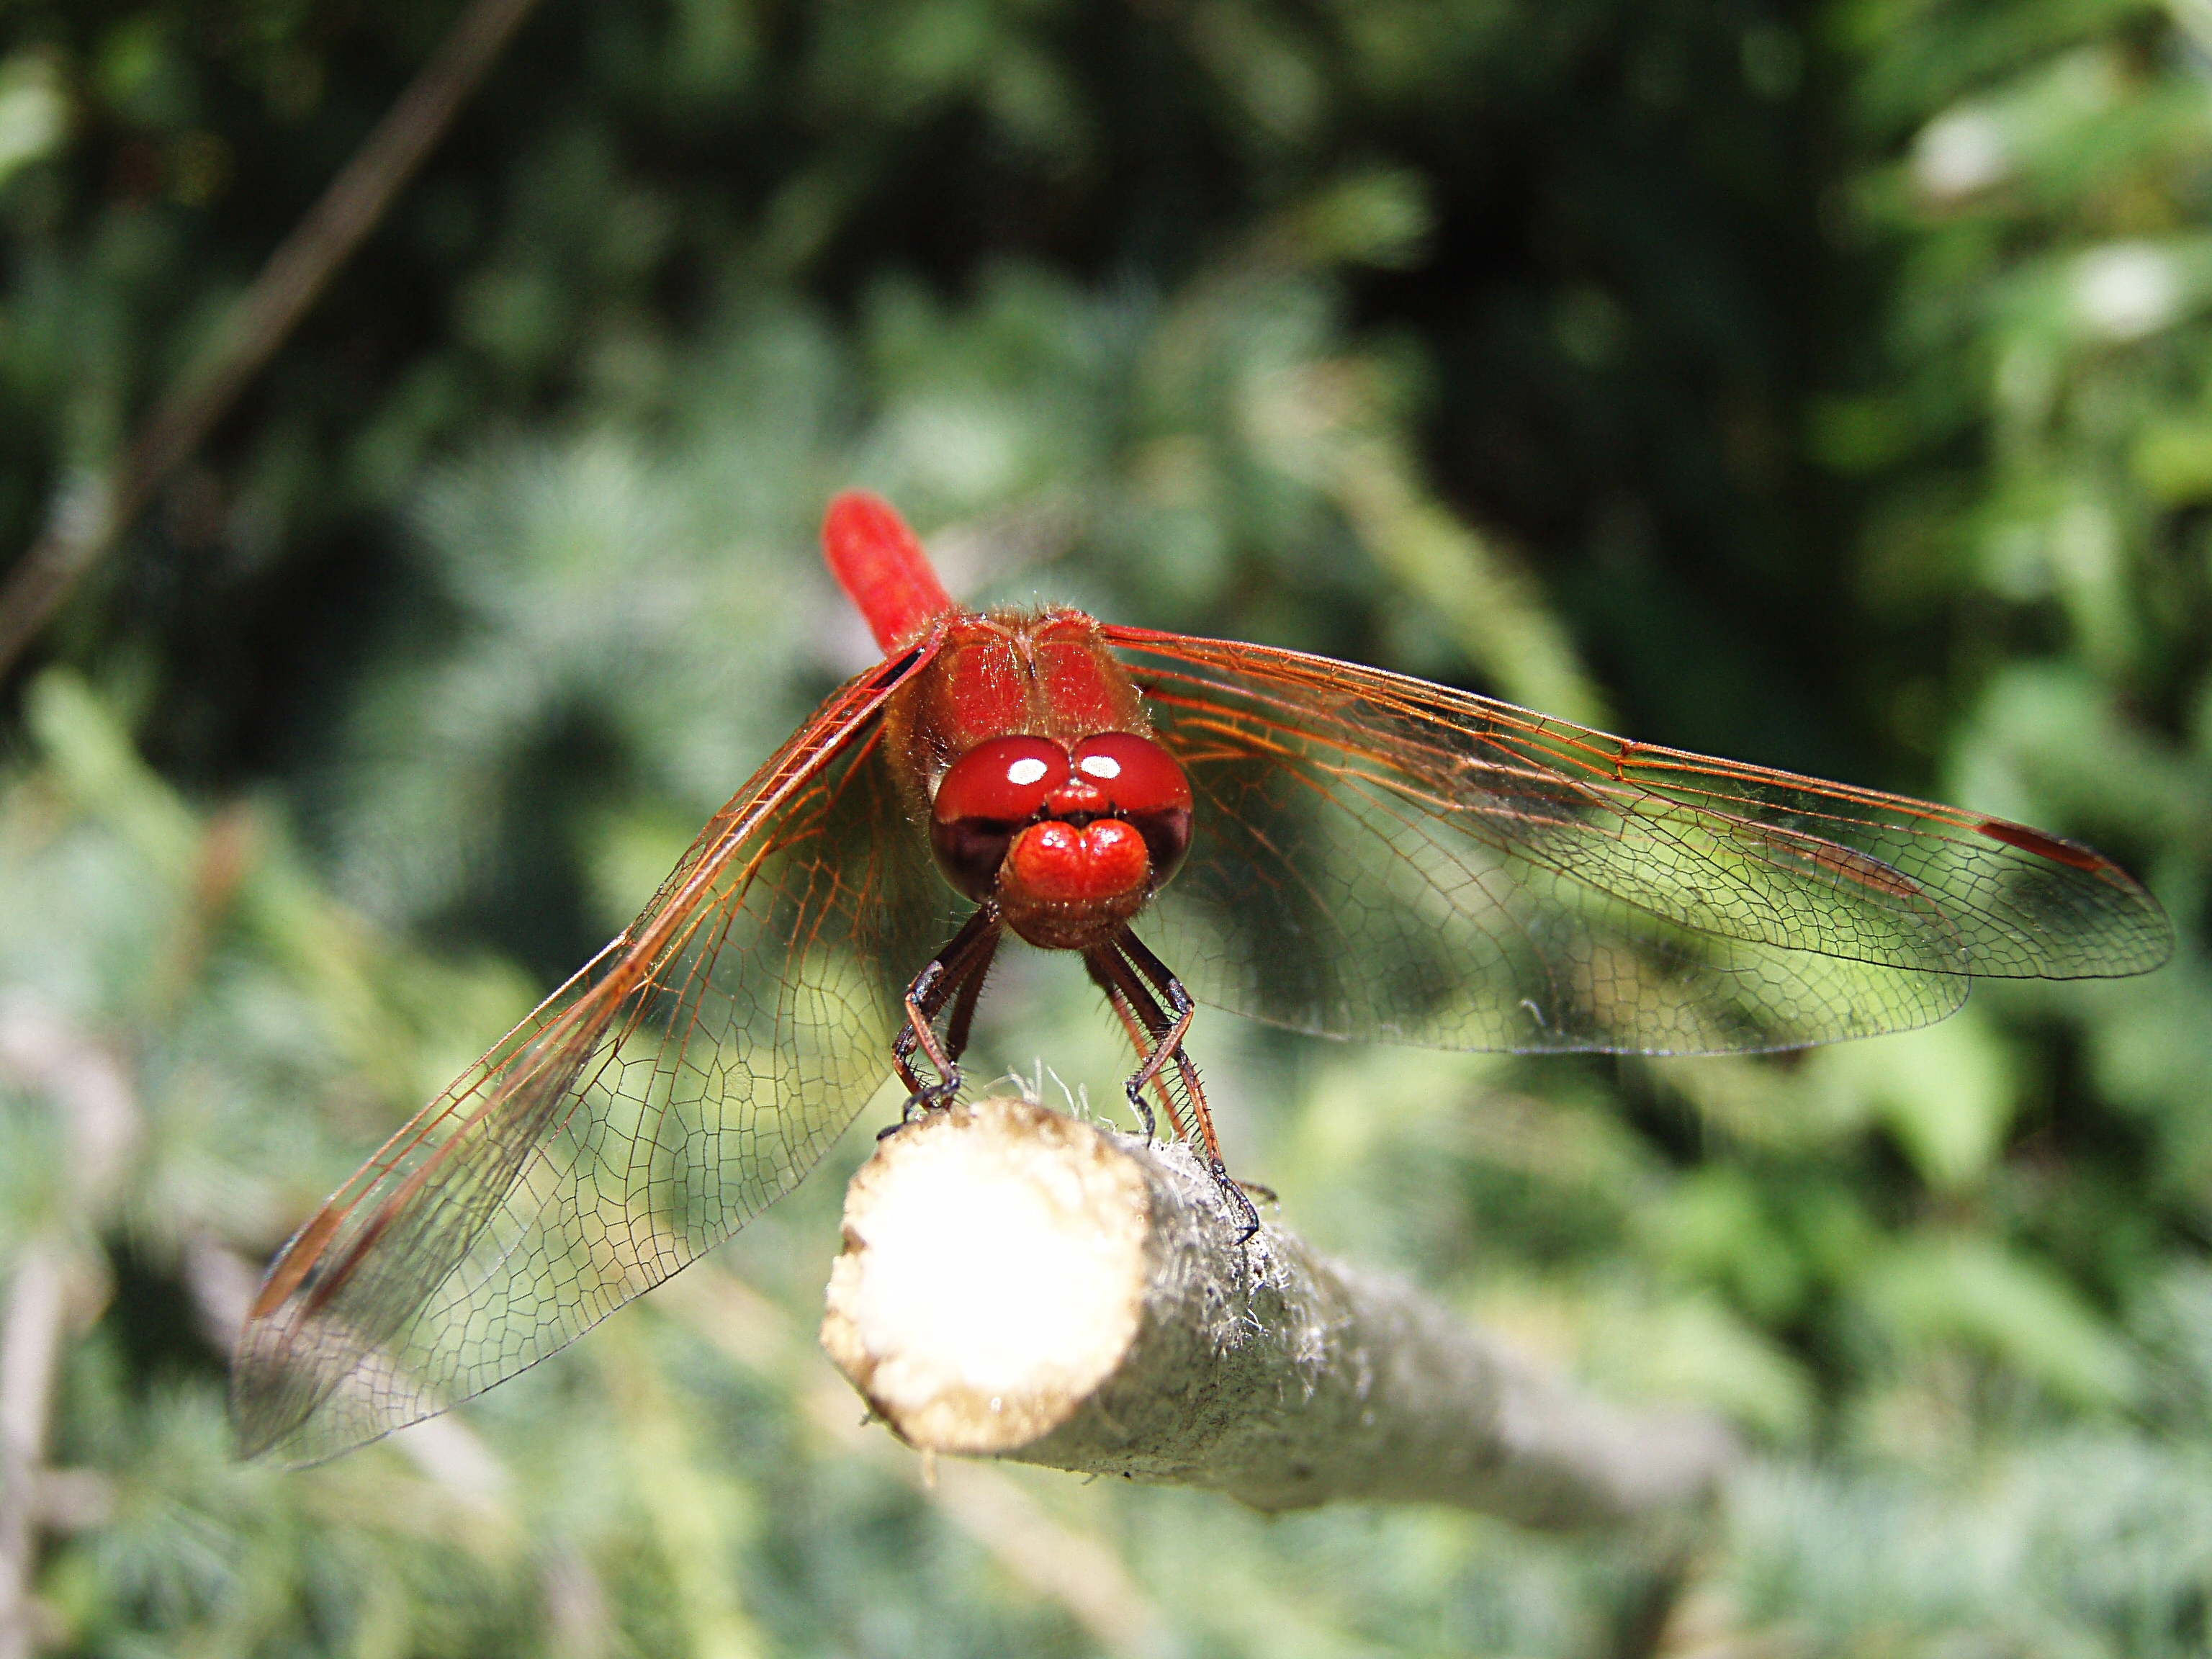 File:Male Flame Skimmer close up.jpg - Wikimedia Commons